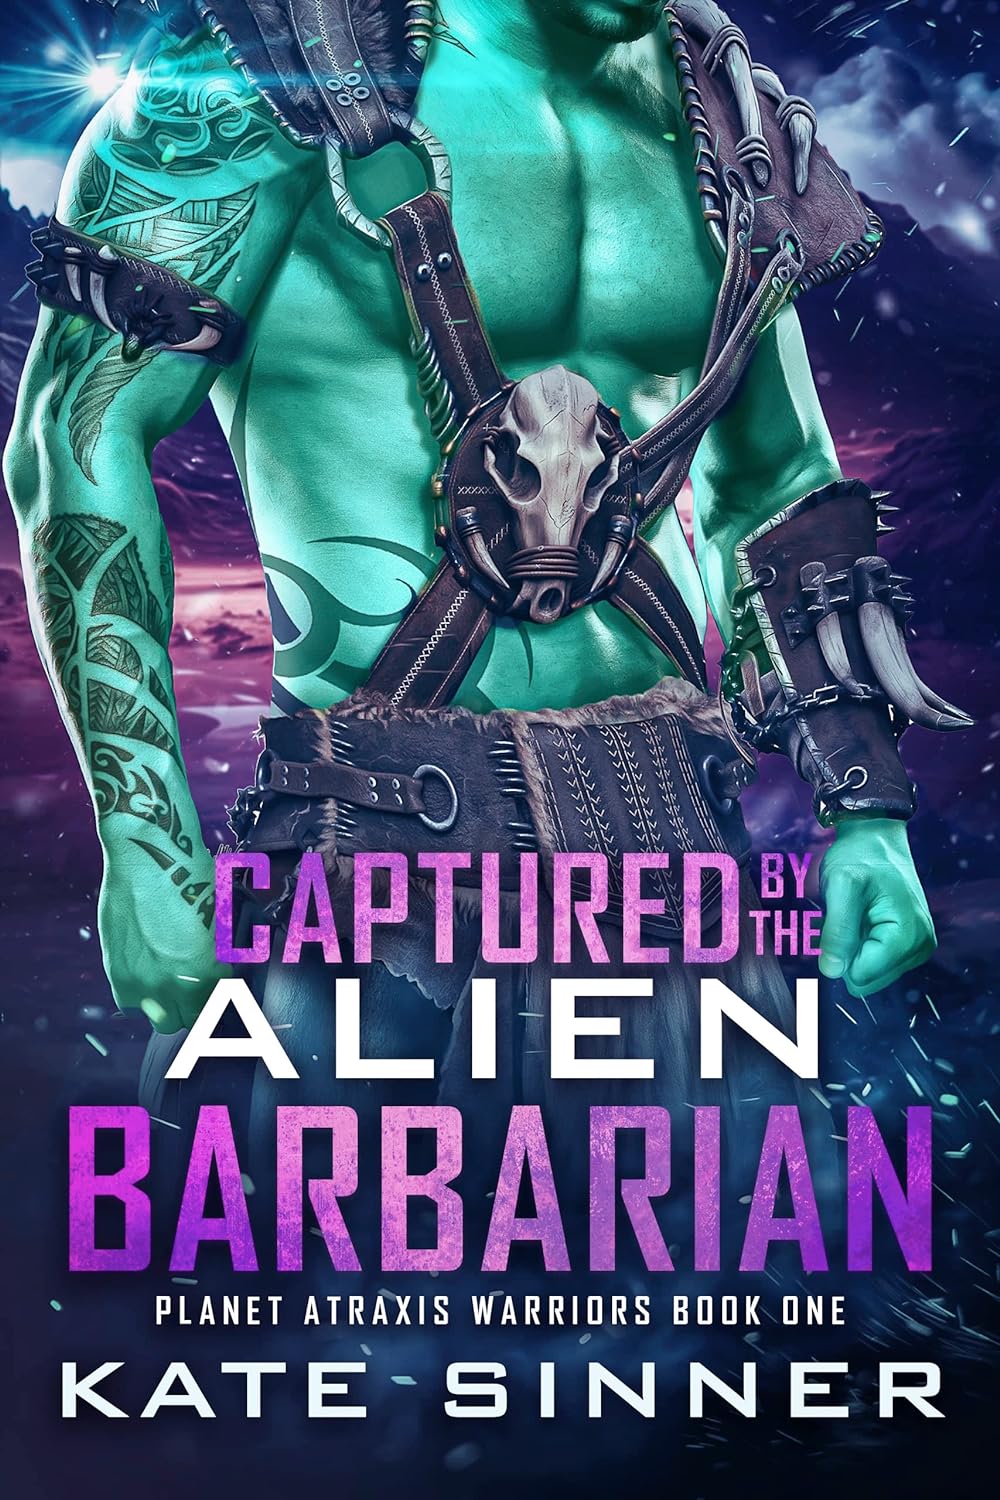 Captured by the Alien Barbarian by Kate Sinner